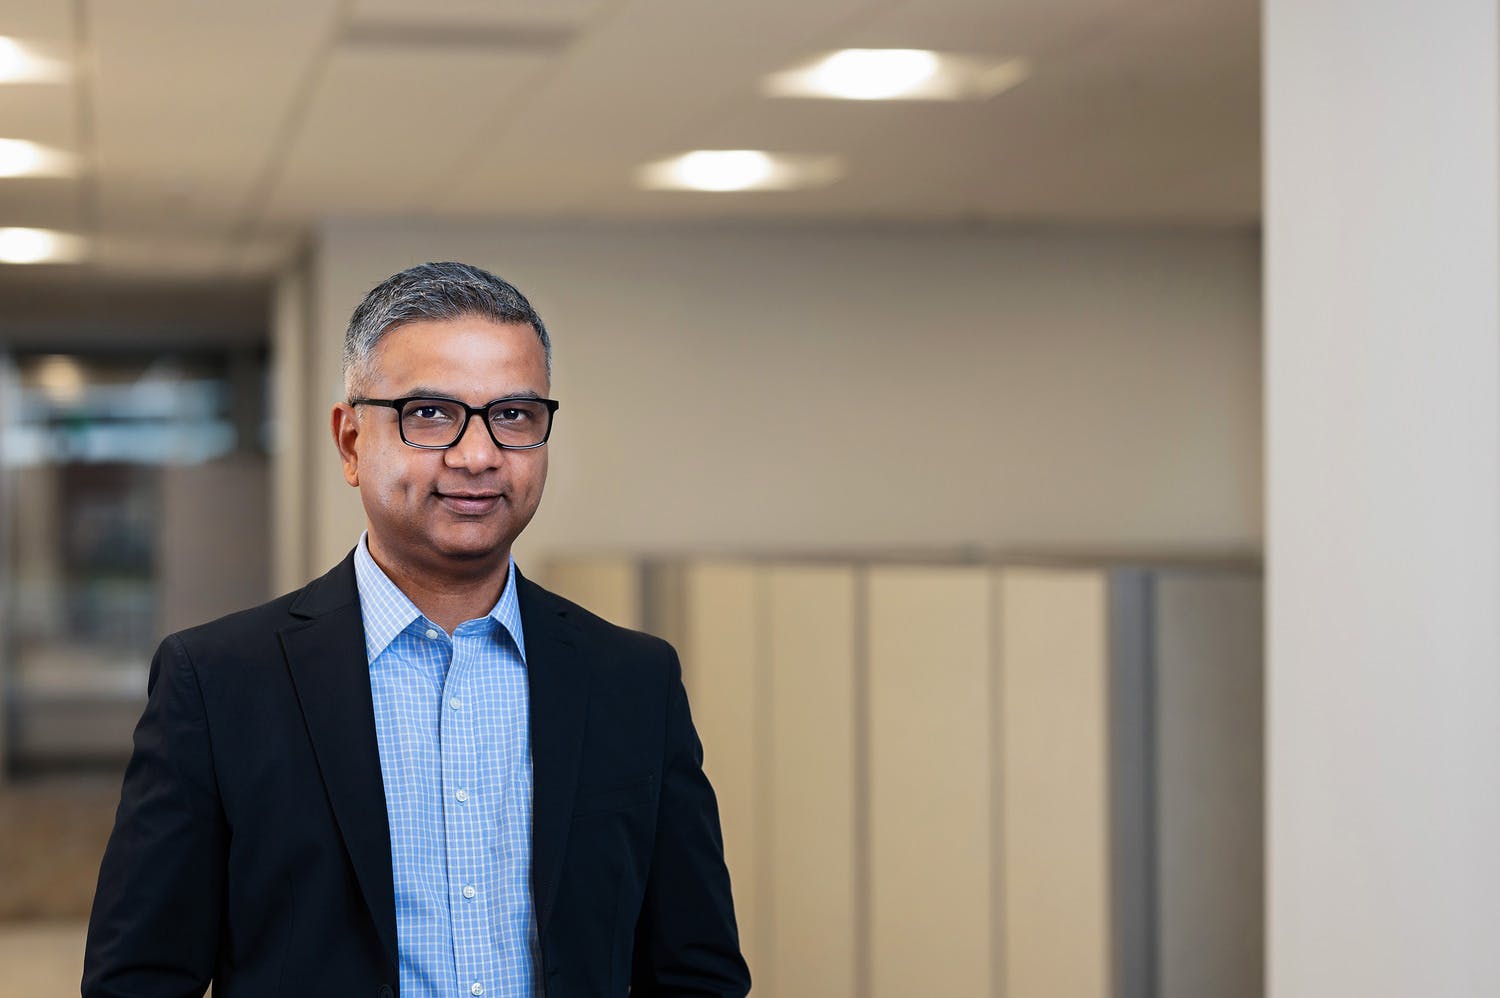 Parkhill Welcomes Umesh Atre as New Sustainability Lead